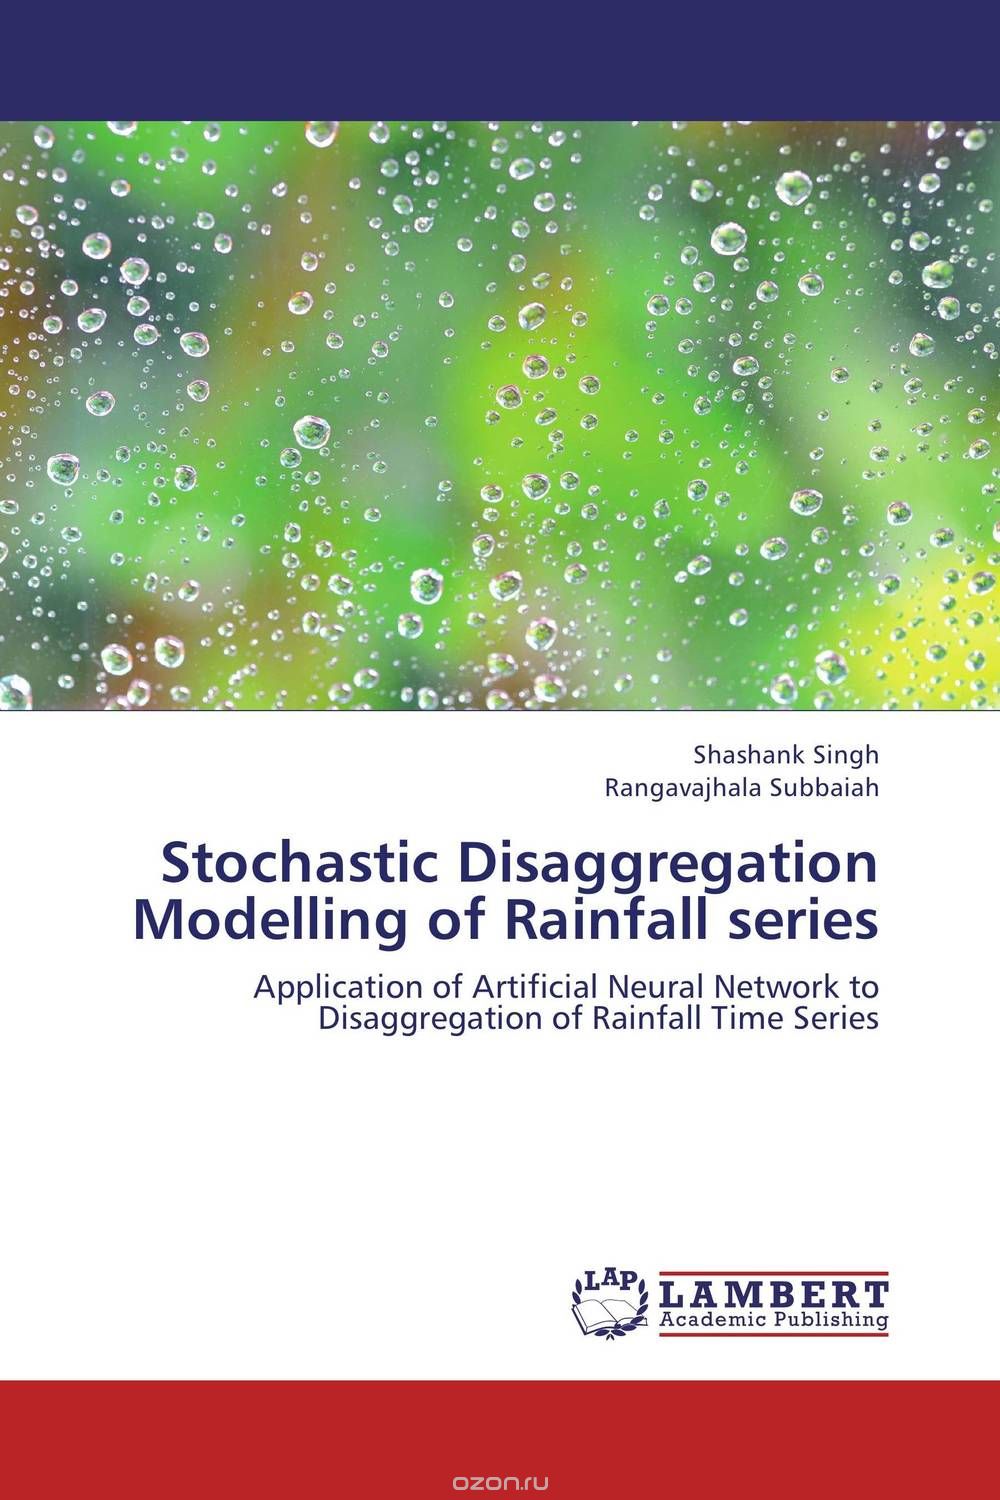 Stochastic Disaggregation Modelling of Rainfall series